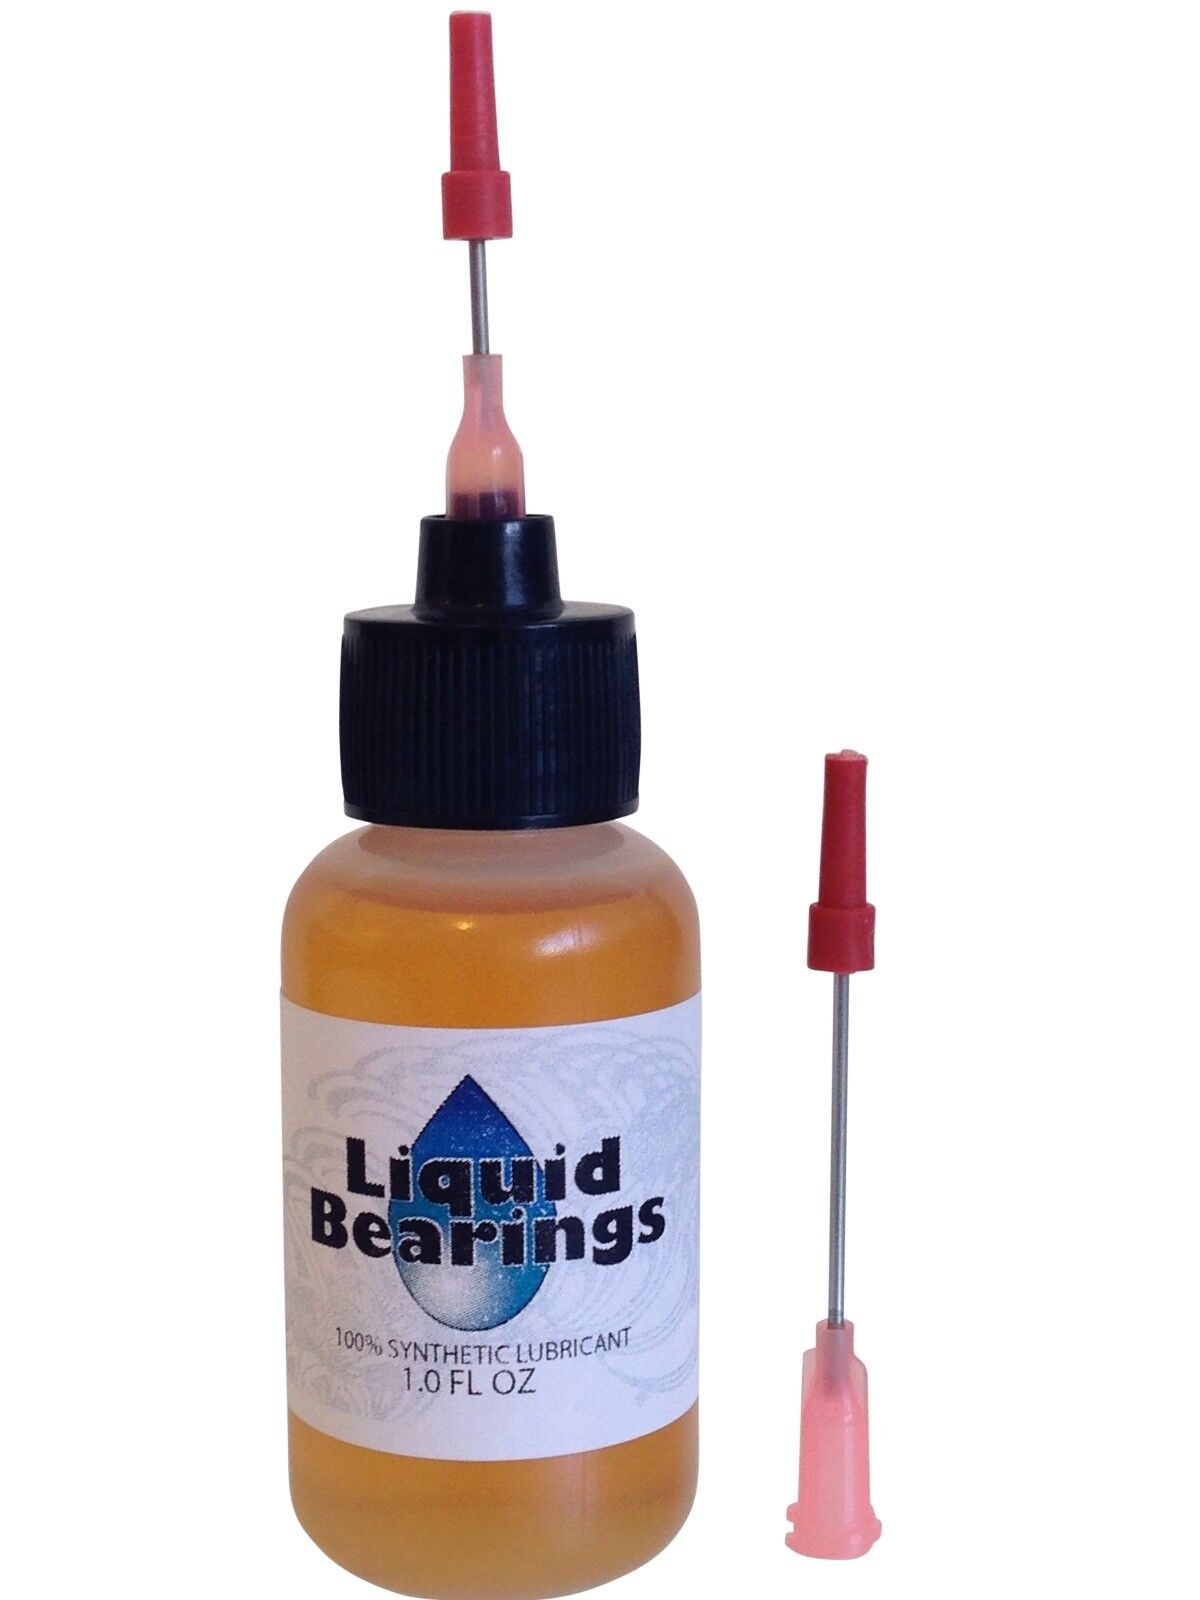 Liquid Bearings, BEST 100%-synthetic oil for any typewriter, includes 2 needles